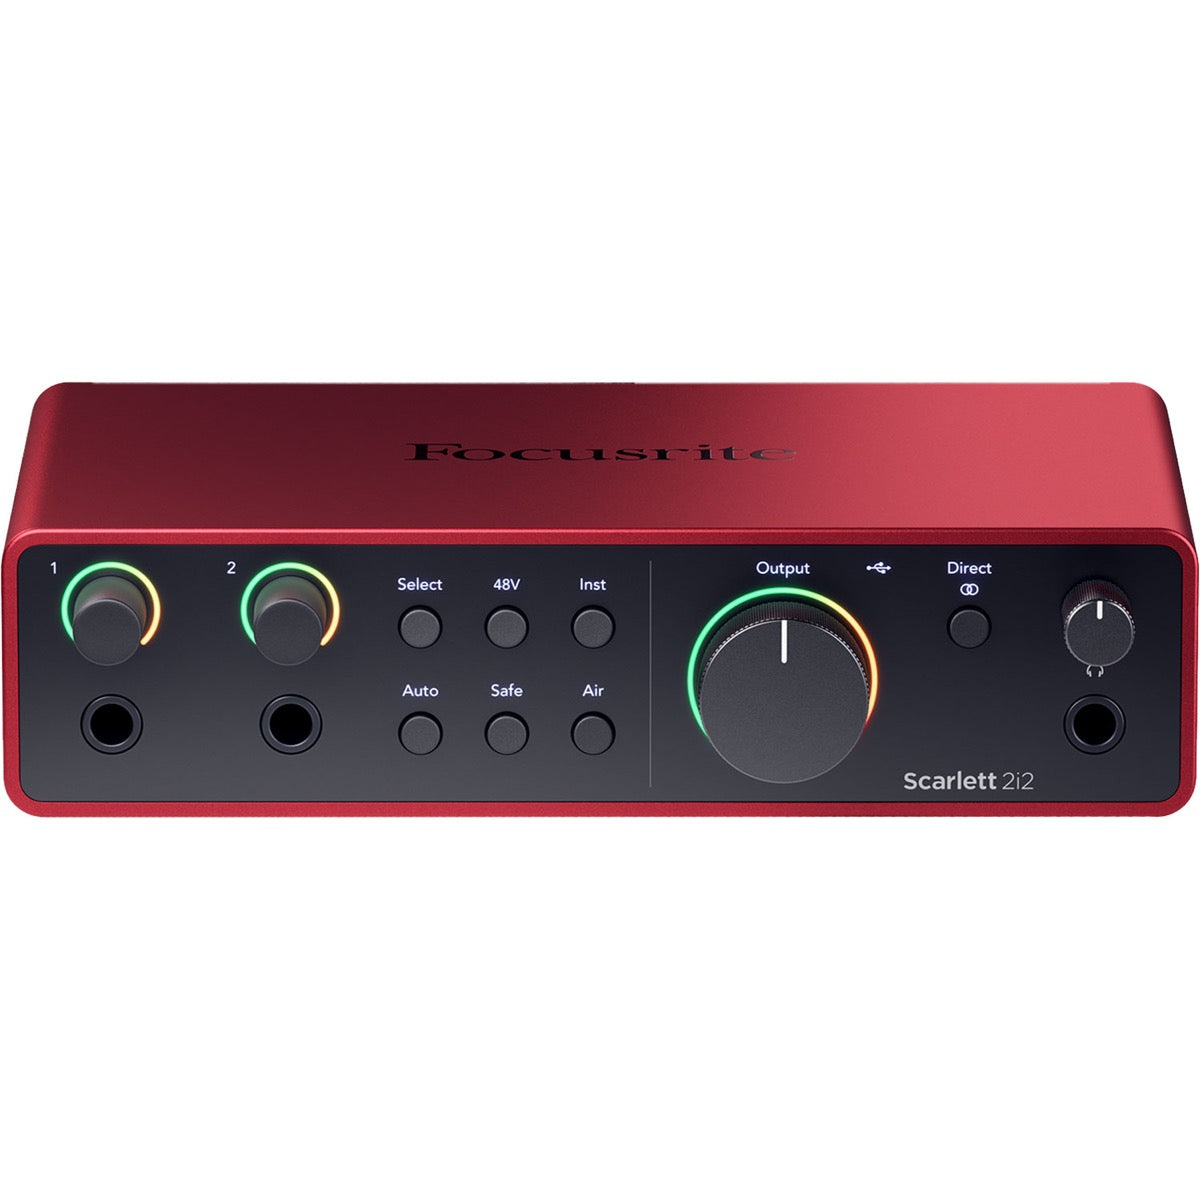 Seven Of The Best Audio Interfaces For Post Production